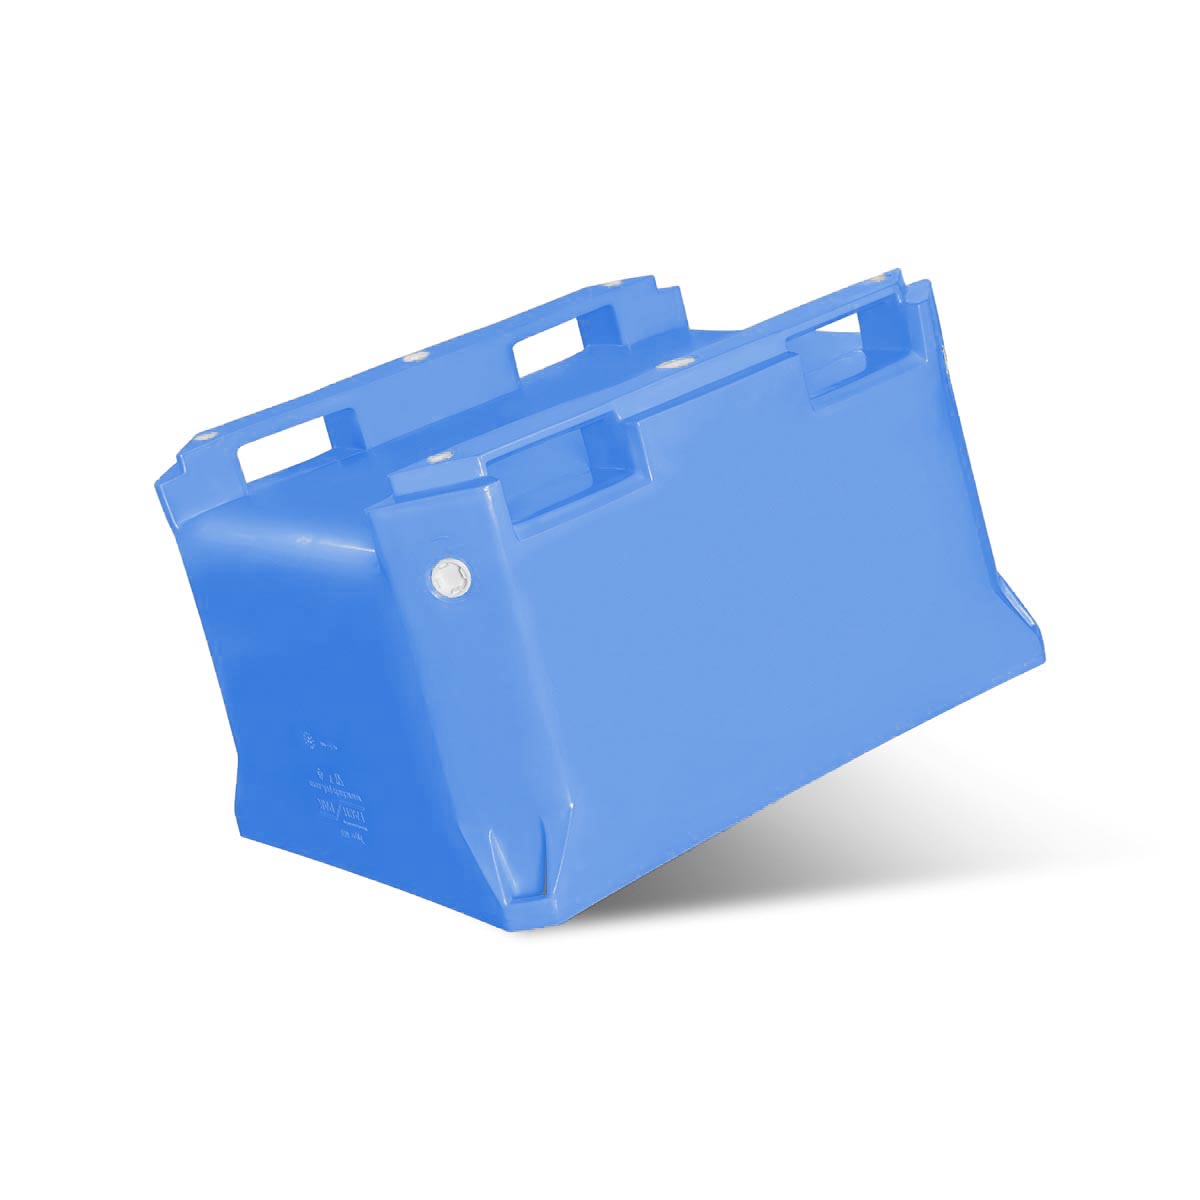 insulated_container_620L_1230x1030x750mm_blue2